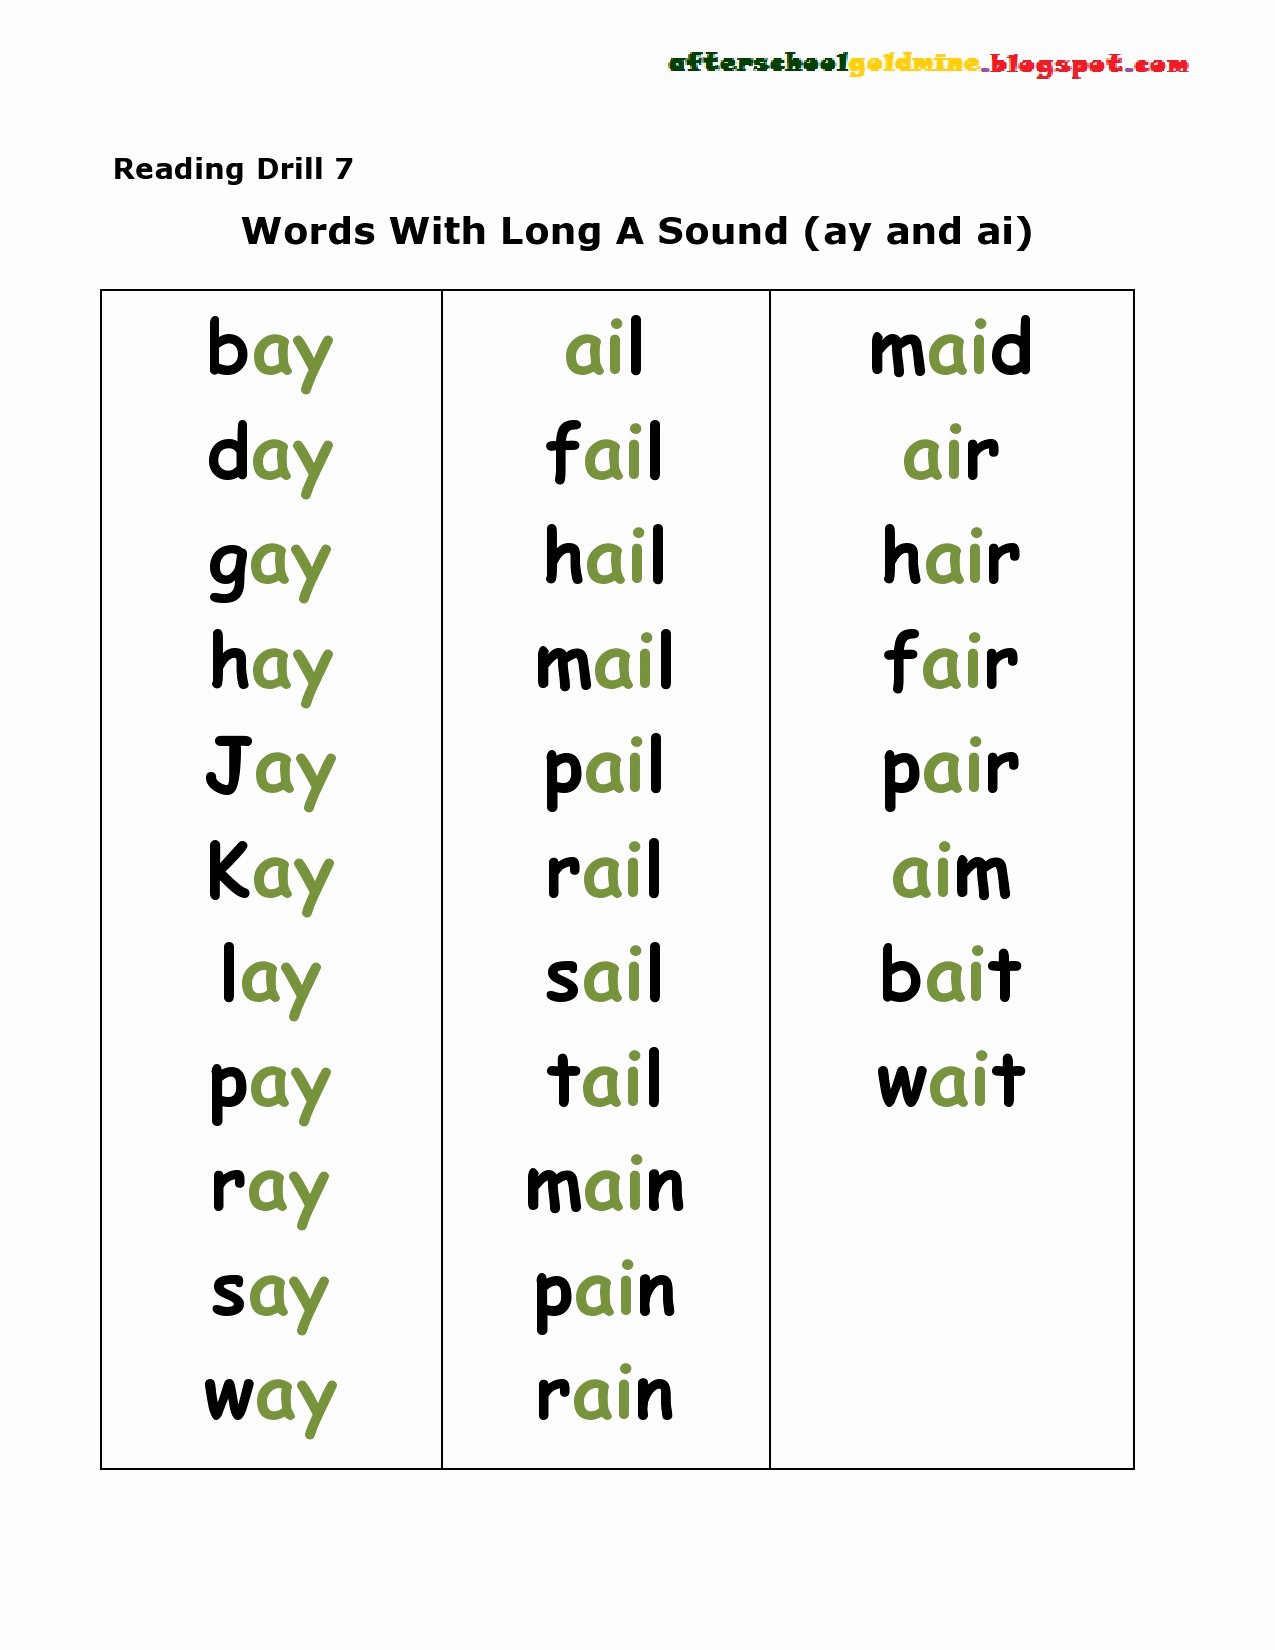 Long A sound Words Worksheet New Long A sound Words Worksheet the Best Worksheets Image